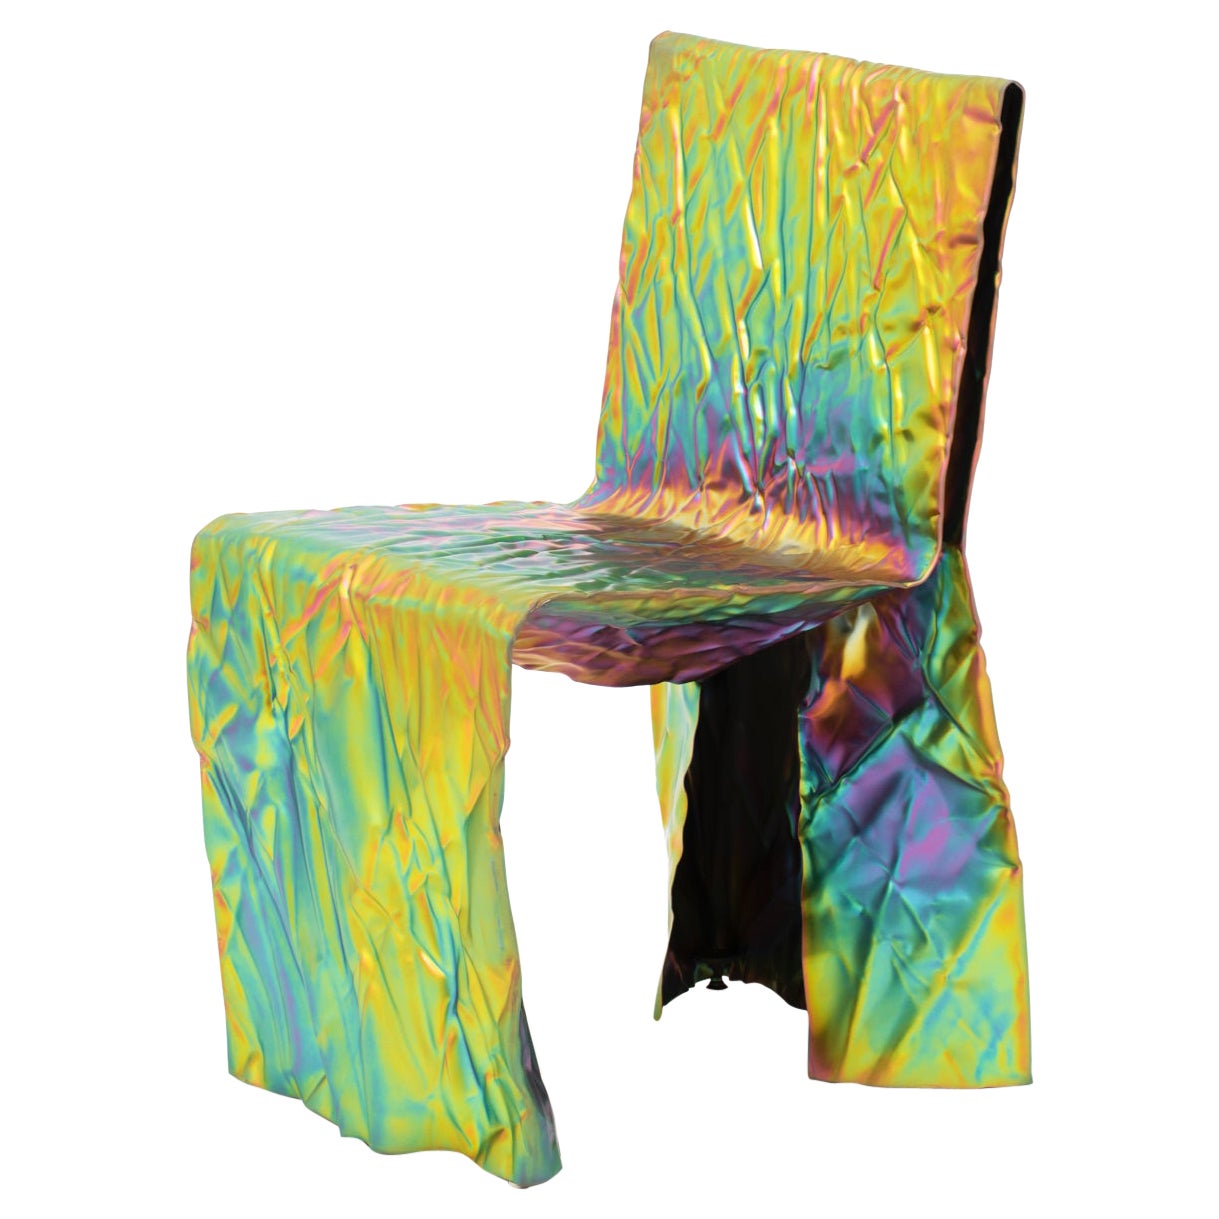 Christopher Prinz “Wrinkled Chair” in Rainbow Iridescent 'Raw' For Sale